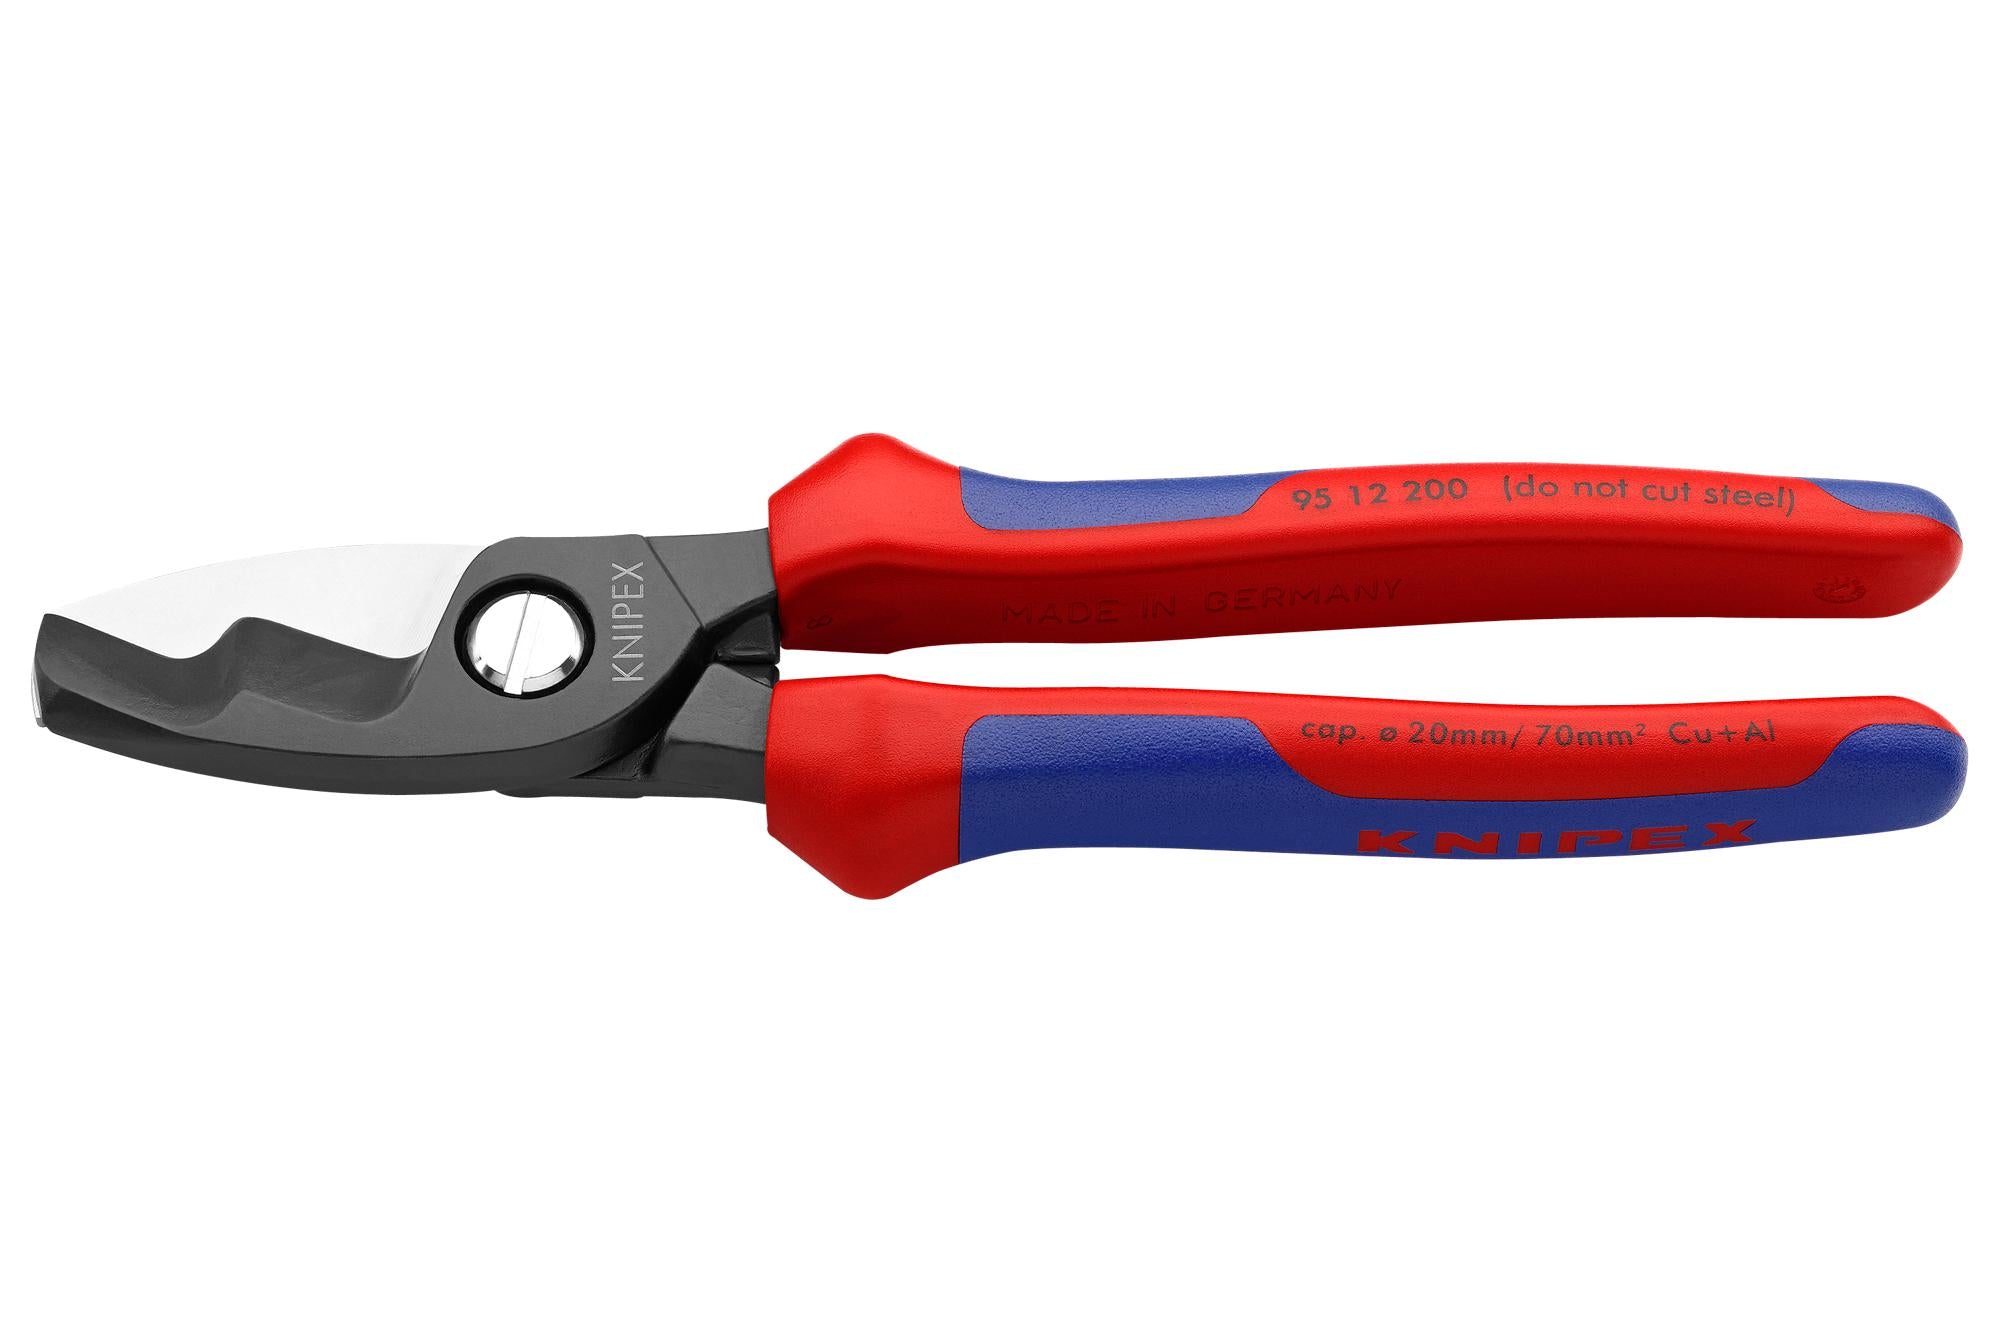 95 12 200 SHEAR, CABLE, TWIN BLADES KNIPEX